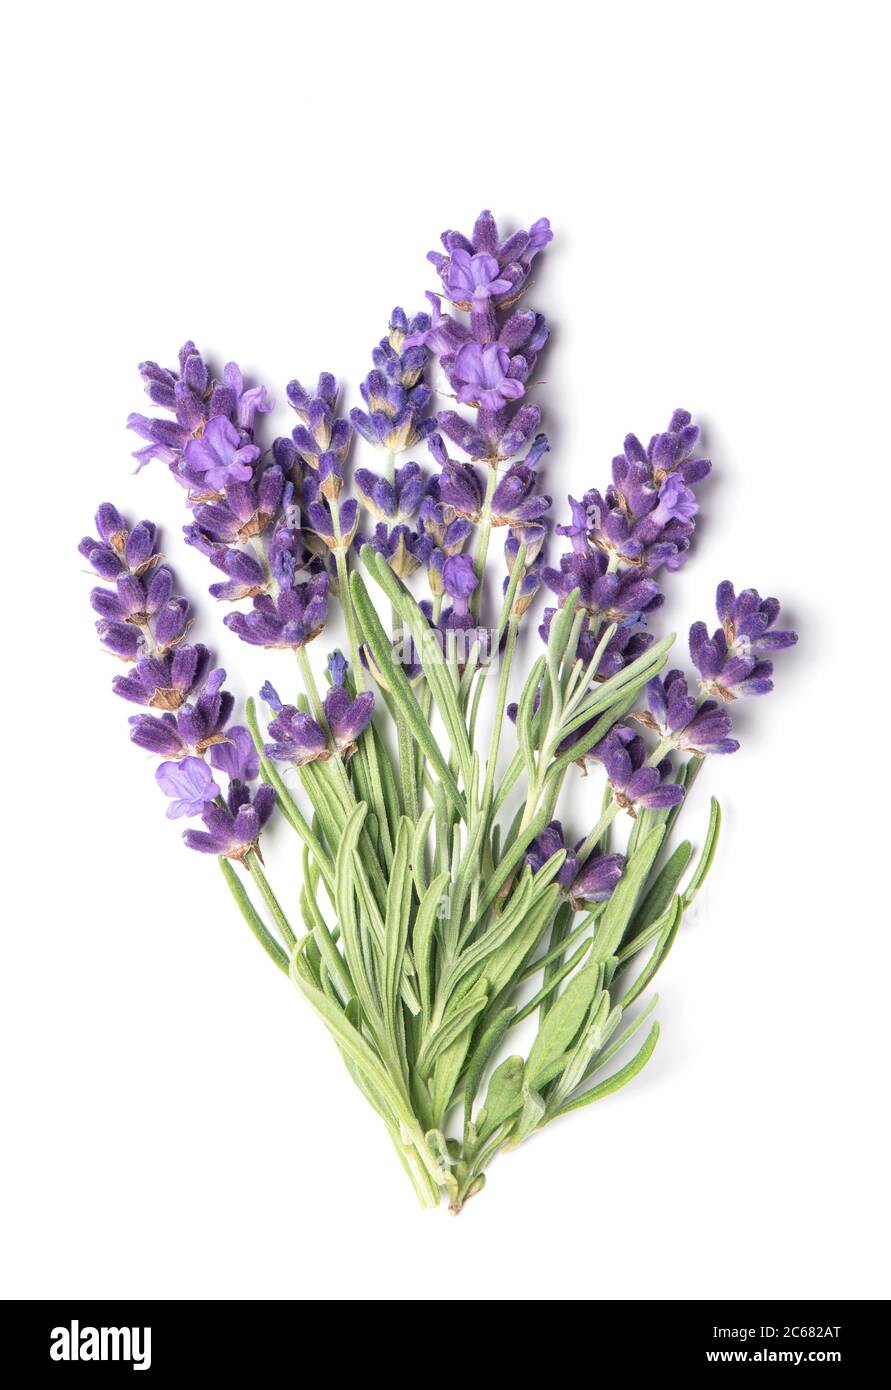 Lavender flowers bouquet on white background Stock Photo - Alamy